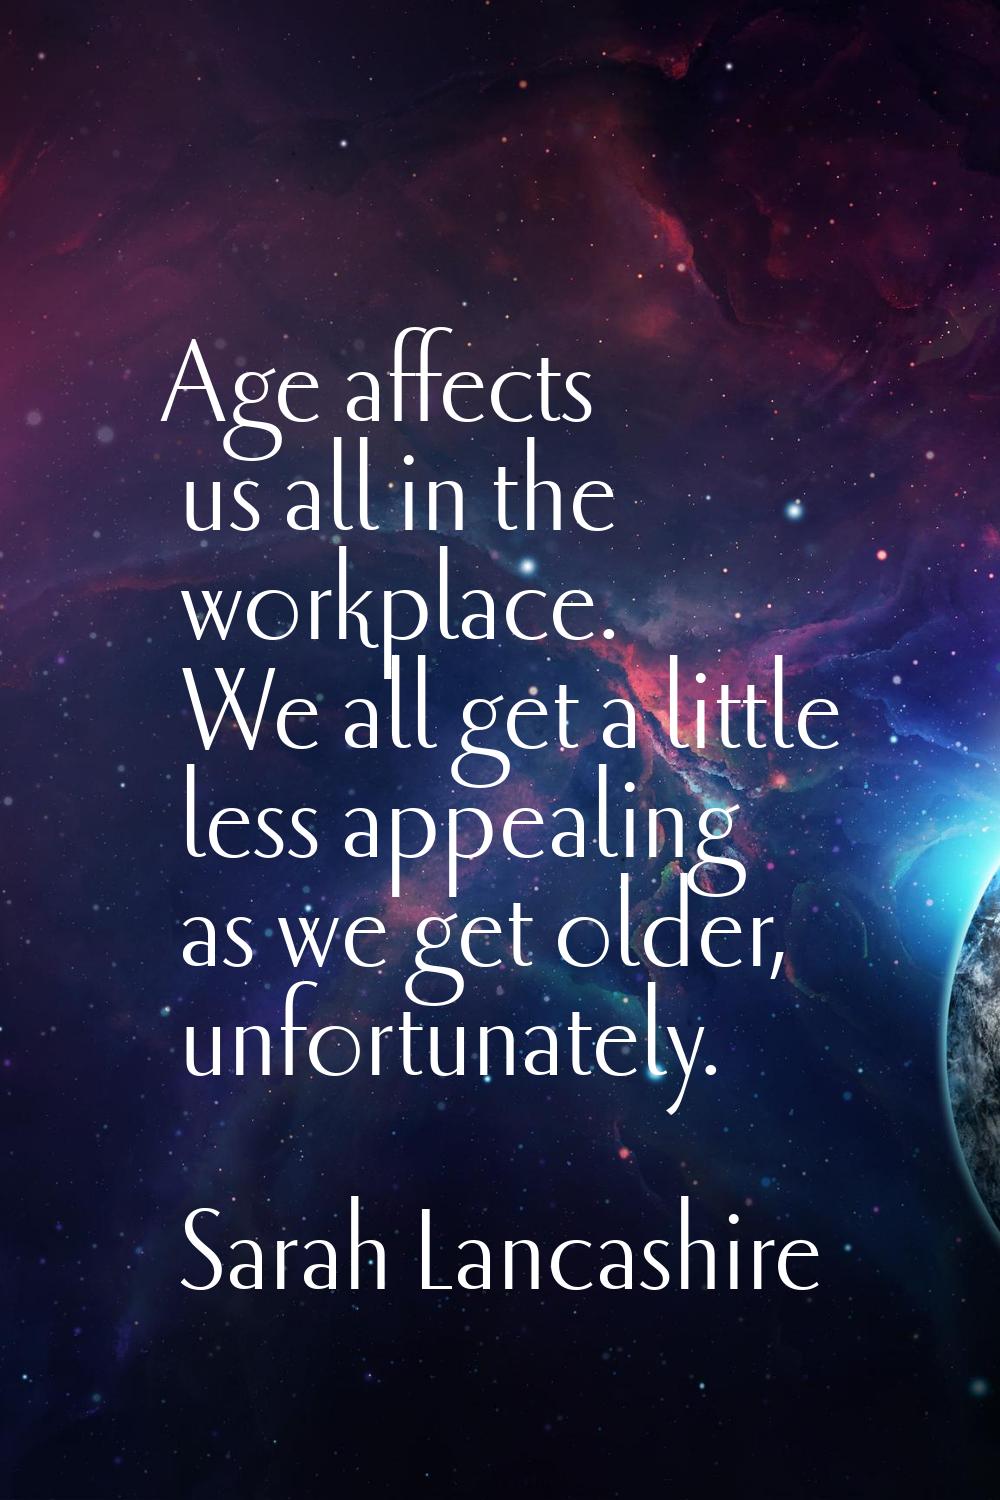 Age affects us all in the workplace. We all get a little less appealing as we get older, unfortunat